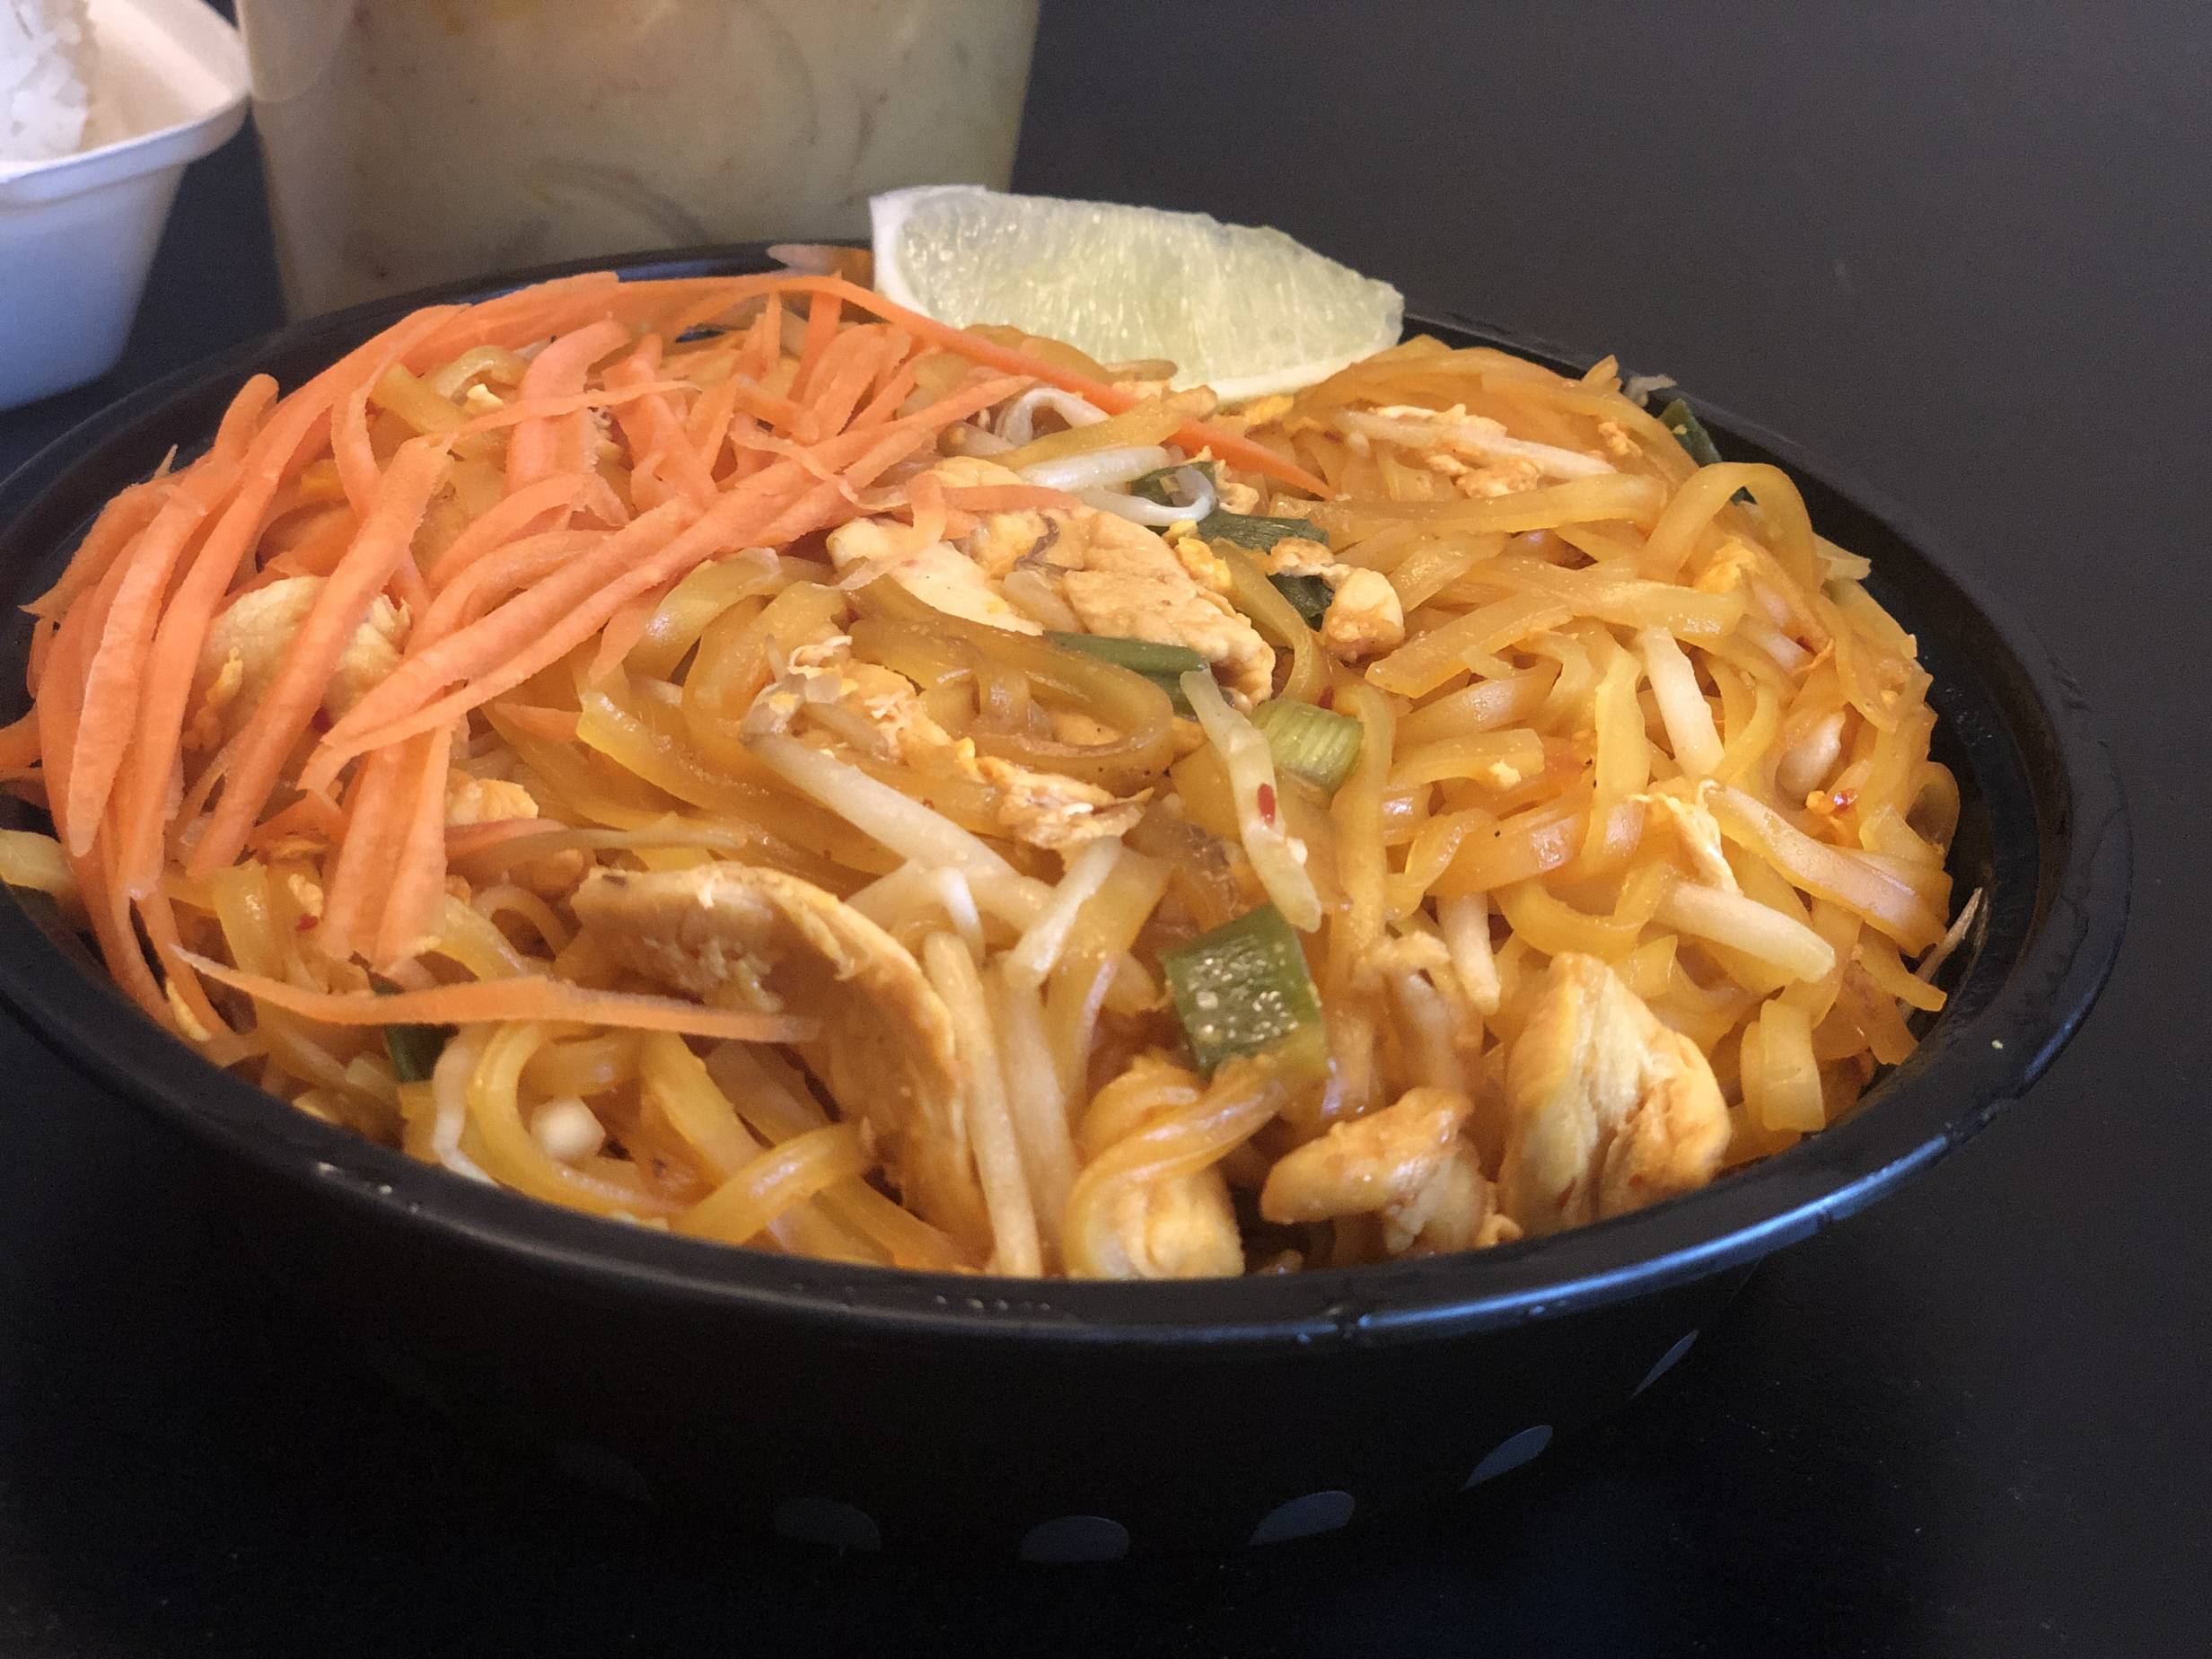 Where’s your favorite place to get pad thai in C-U?